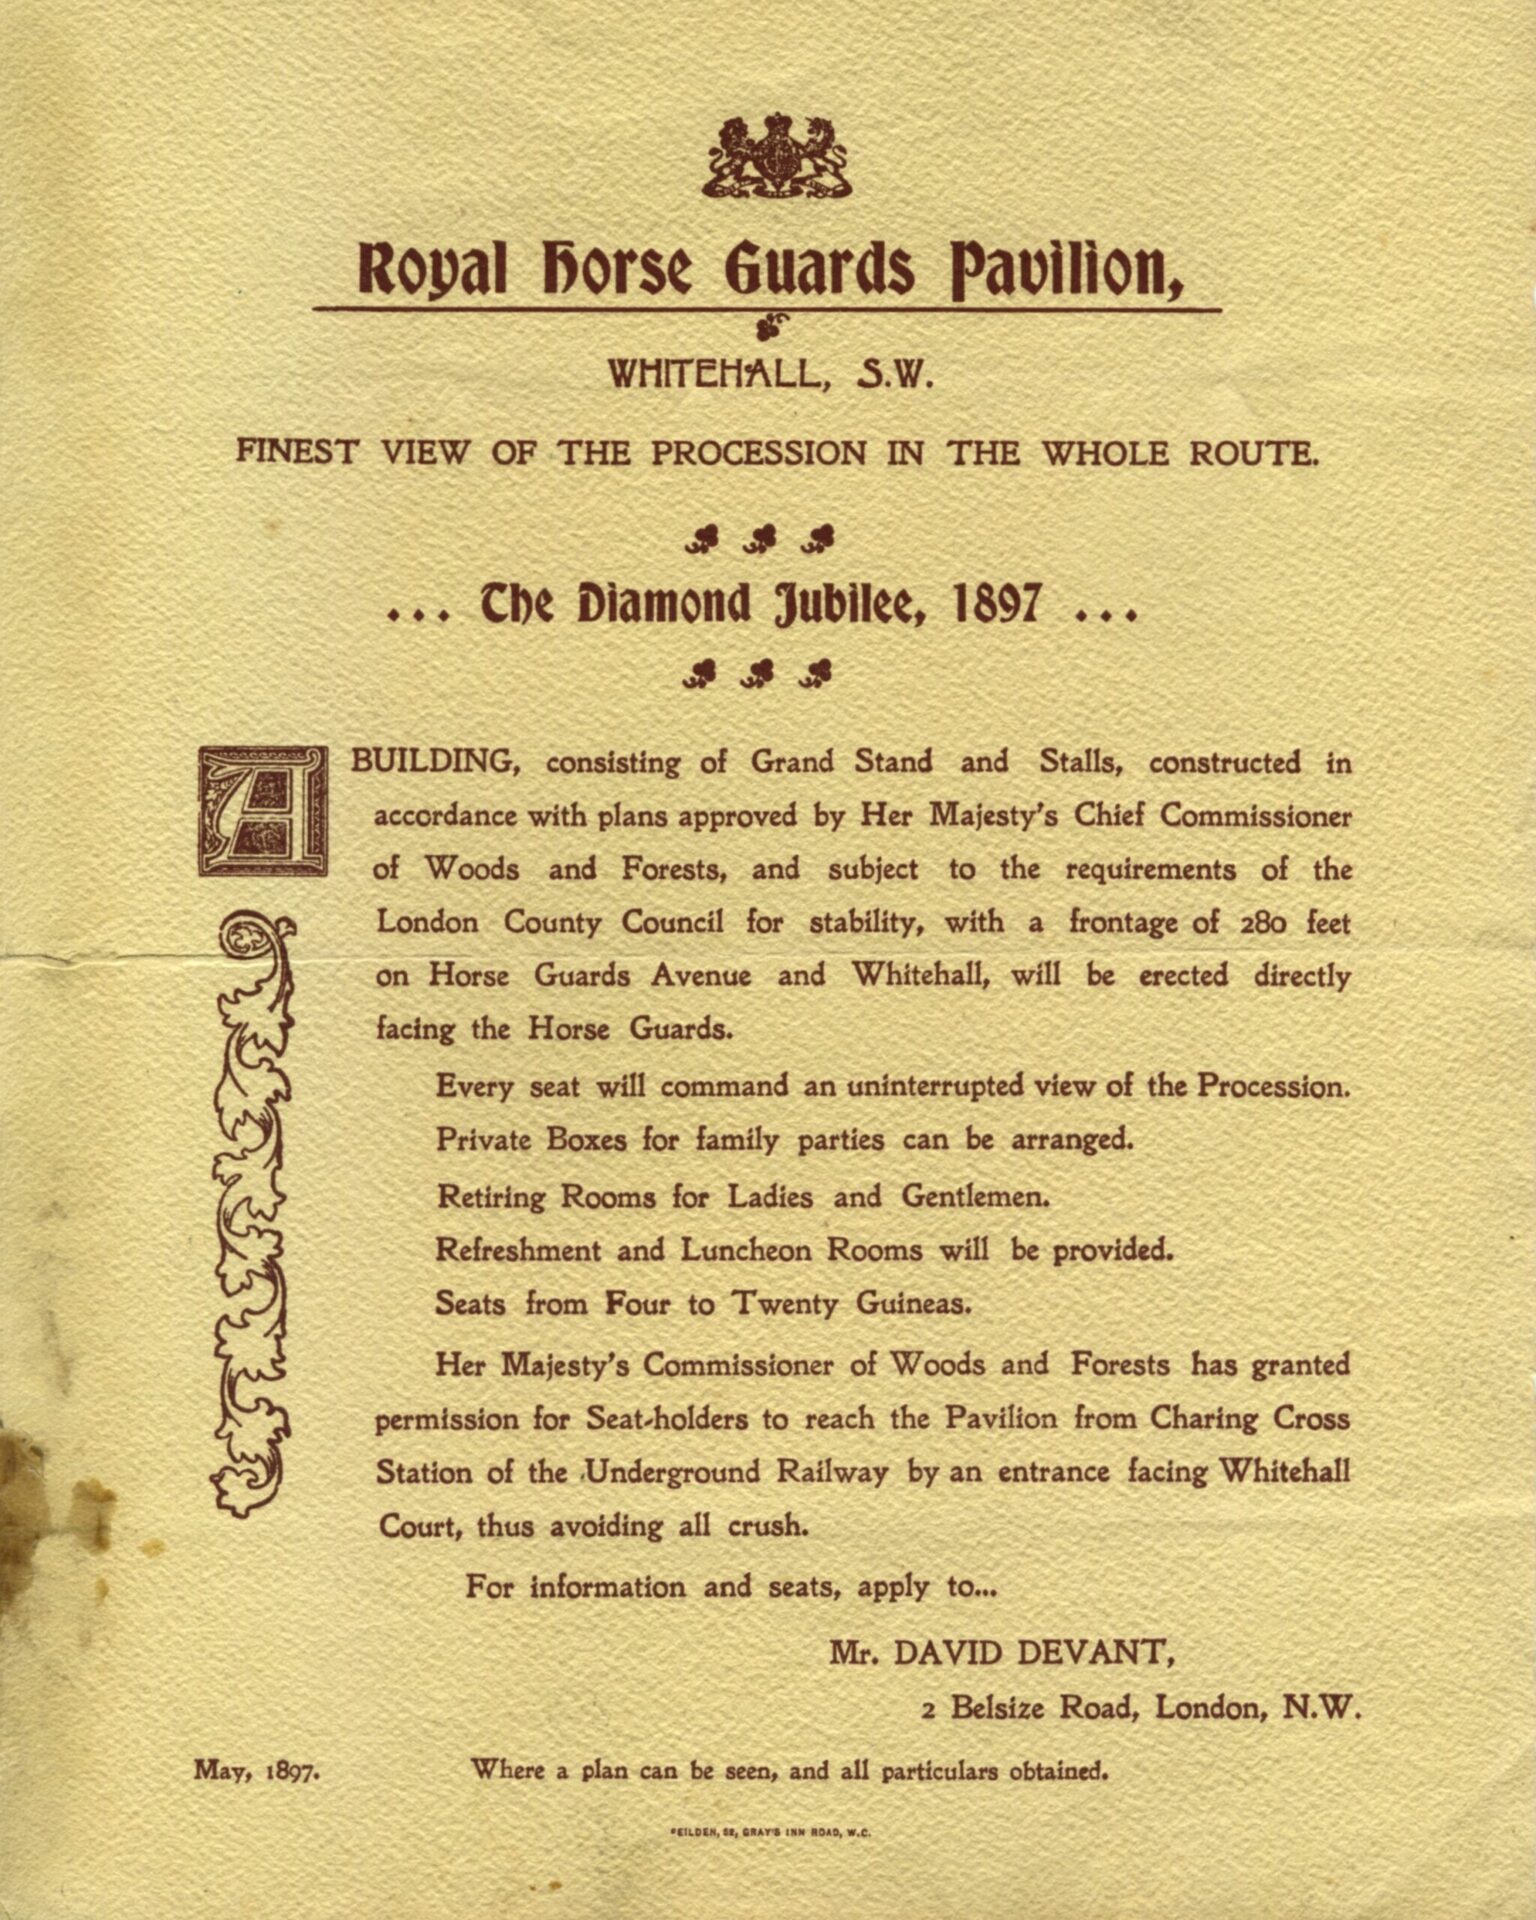 Devant advertisement for seats in the Royal Horse Guards Pavilion for The Diamond Jubilee, 1897.